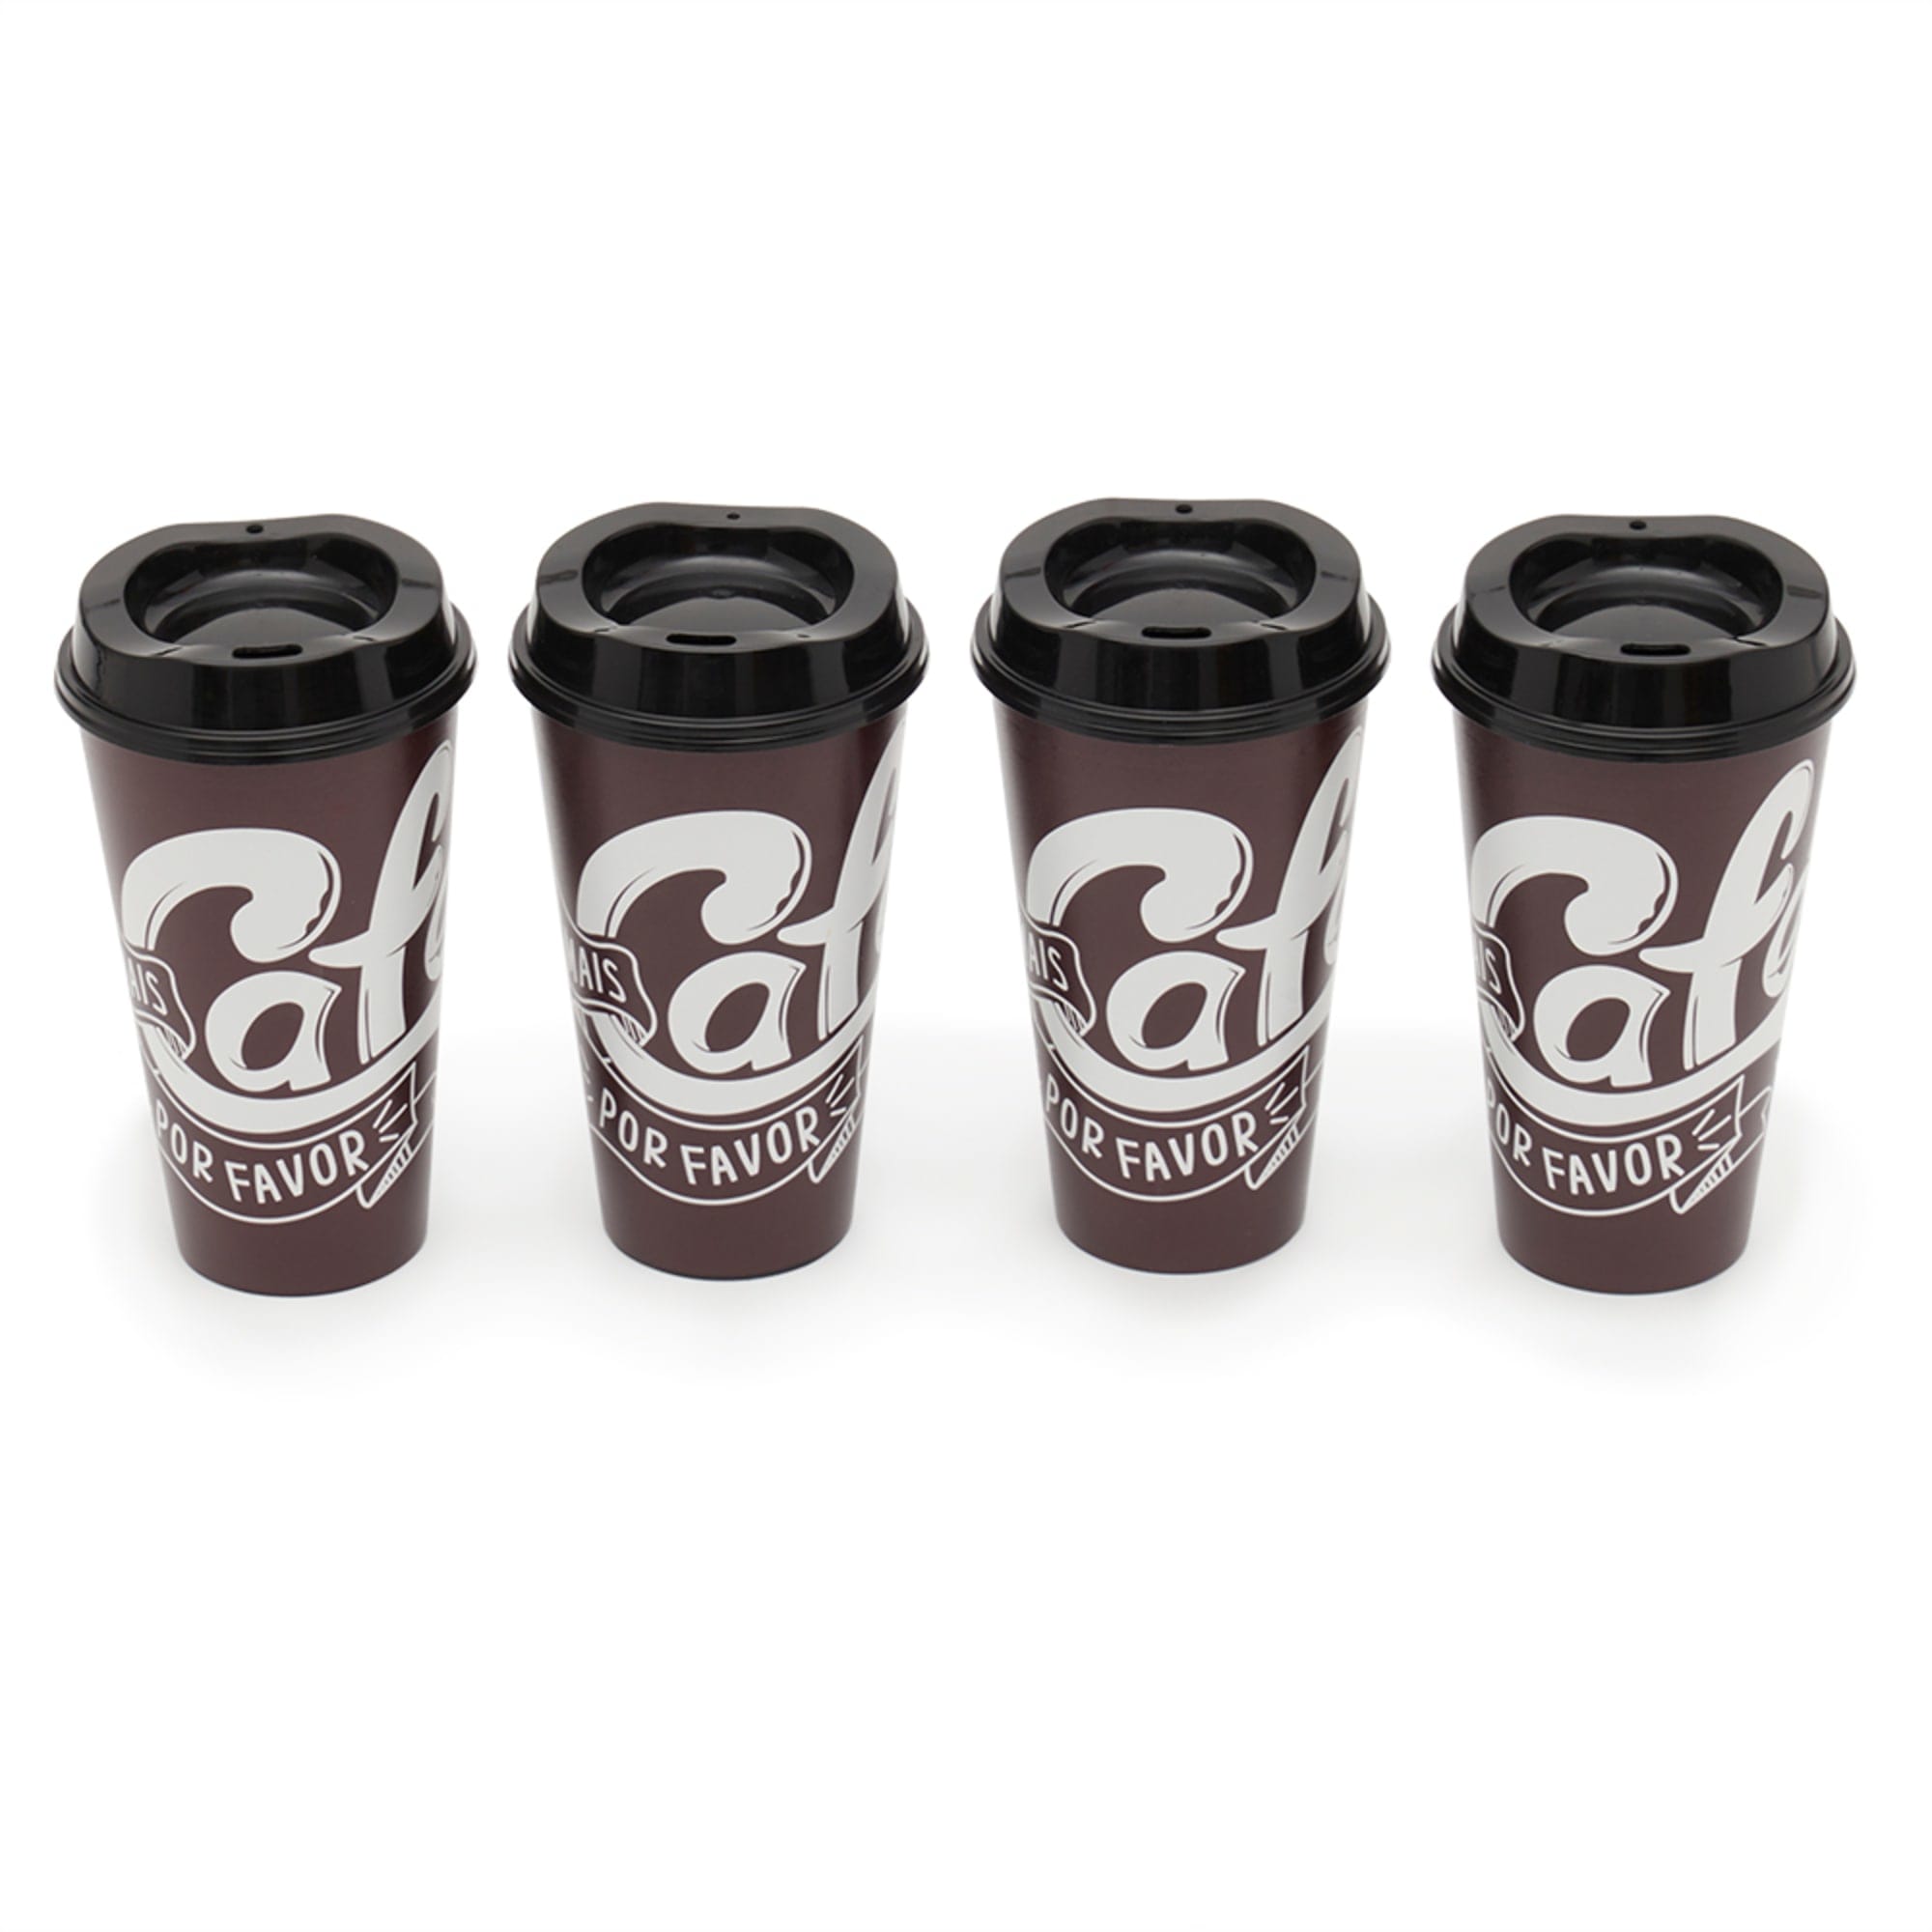 Home Basics 16 oz. 4-Pack of Reusable Plastic Coffee Cups With Lids, Brown $5.00 EACH, CASE PACK OF 28